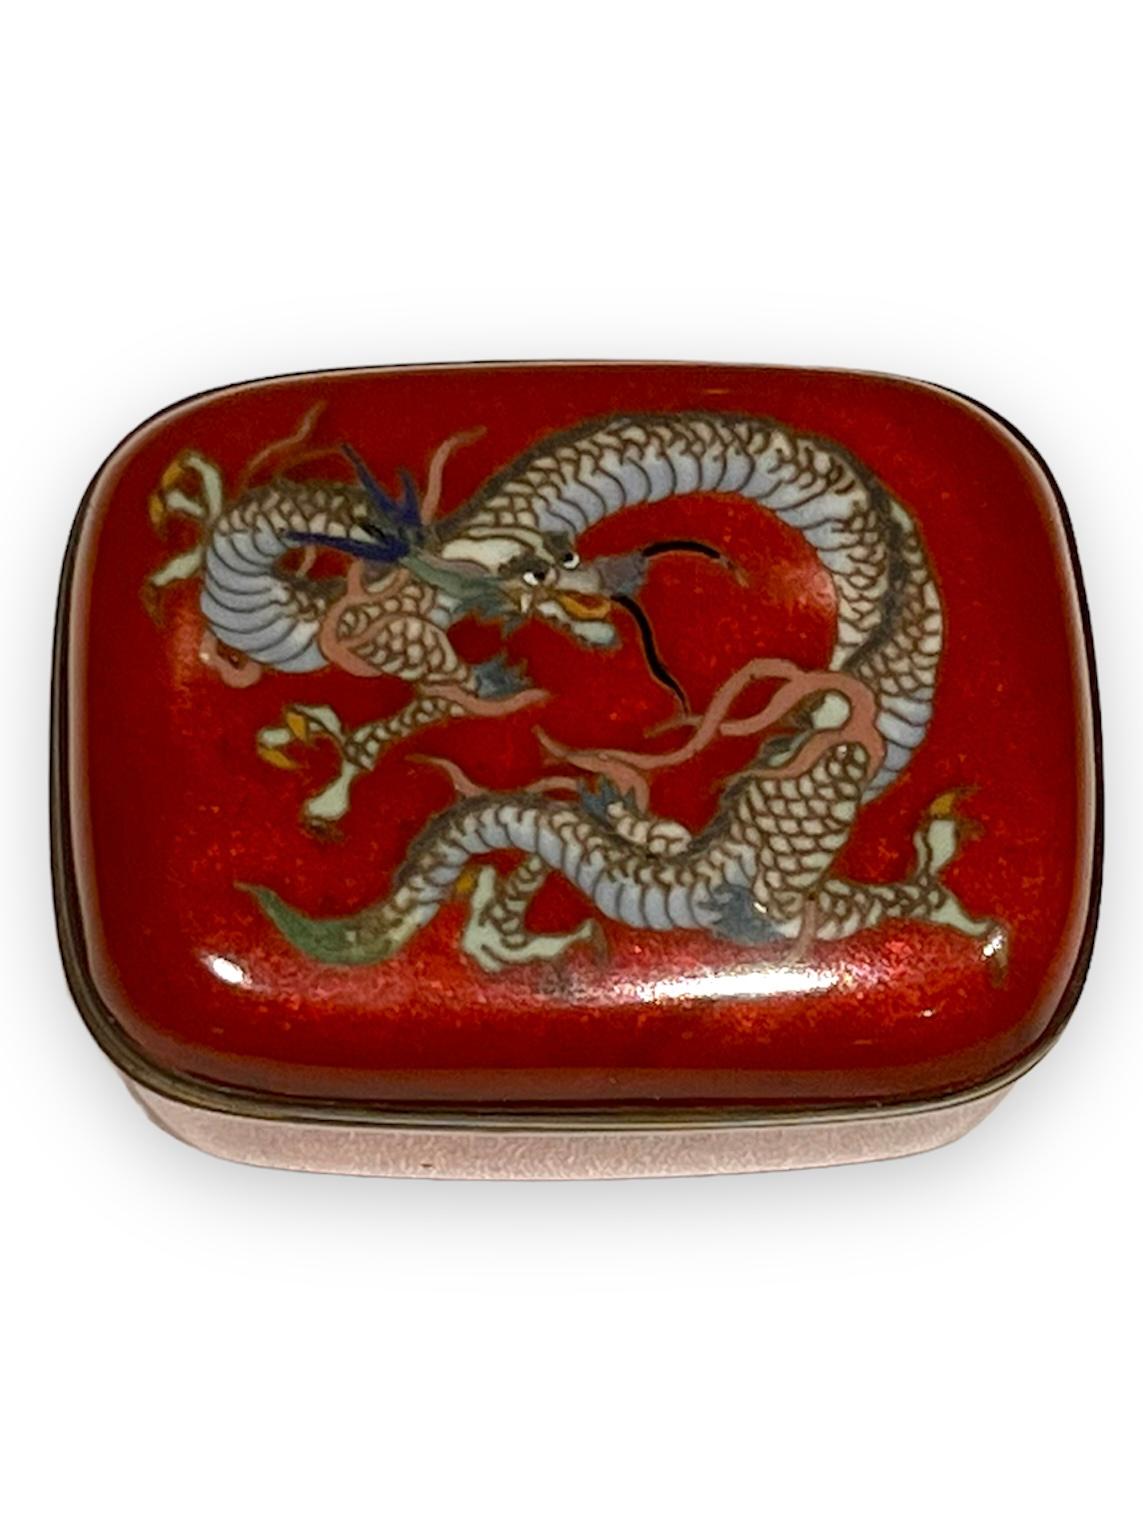 A Exquisite Japanese Cloisonne Enamel Box and Cover. 19th C
Meiji Period
Of rounded rectangular form, worked in silver wire with an intricate colorful dragon, reserved on a apple red metallic ground with silver rims and lined with silk